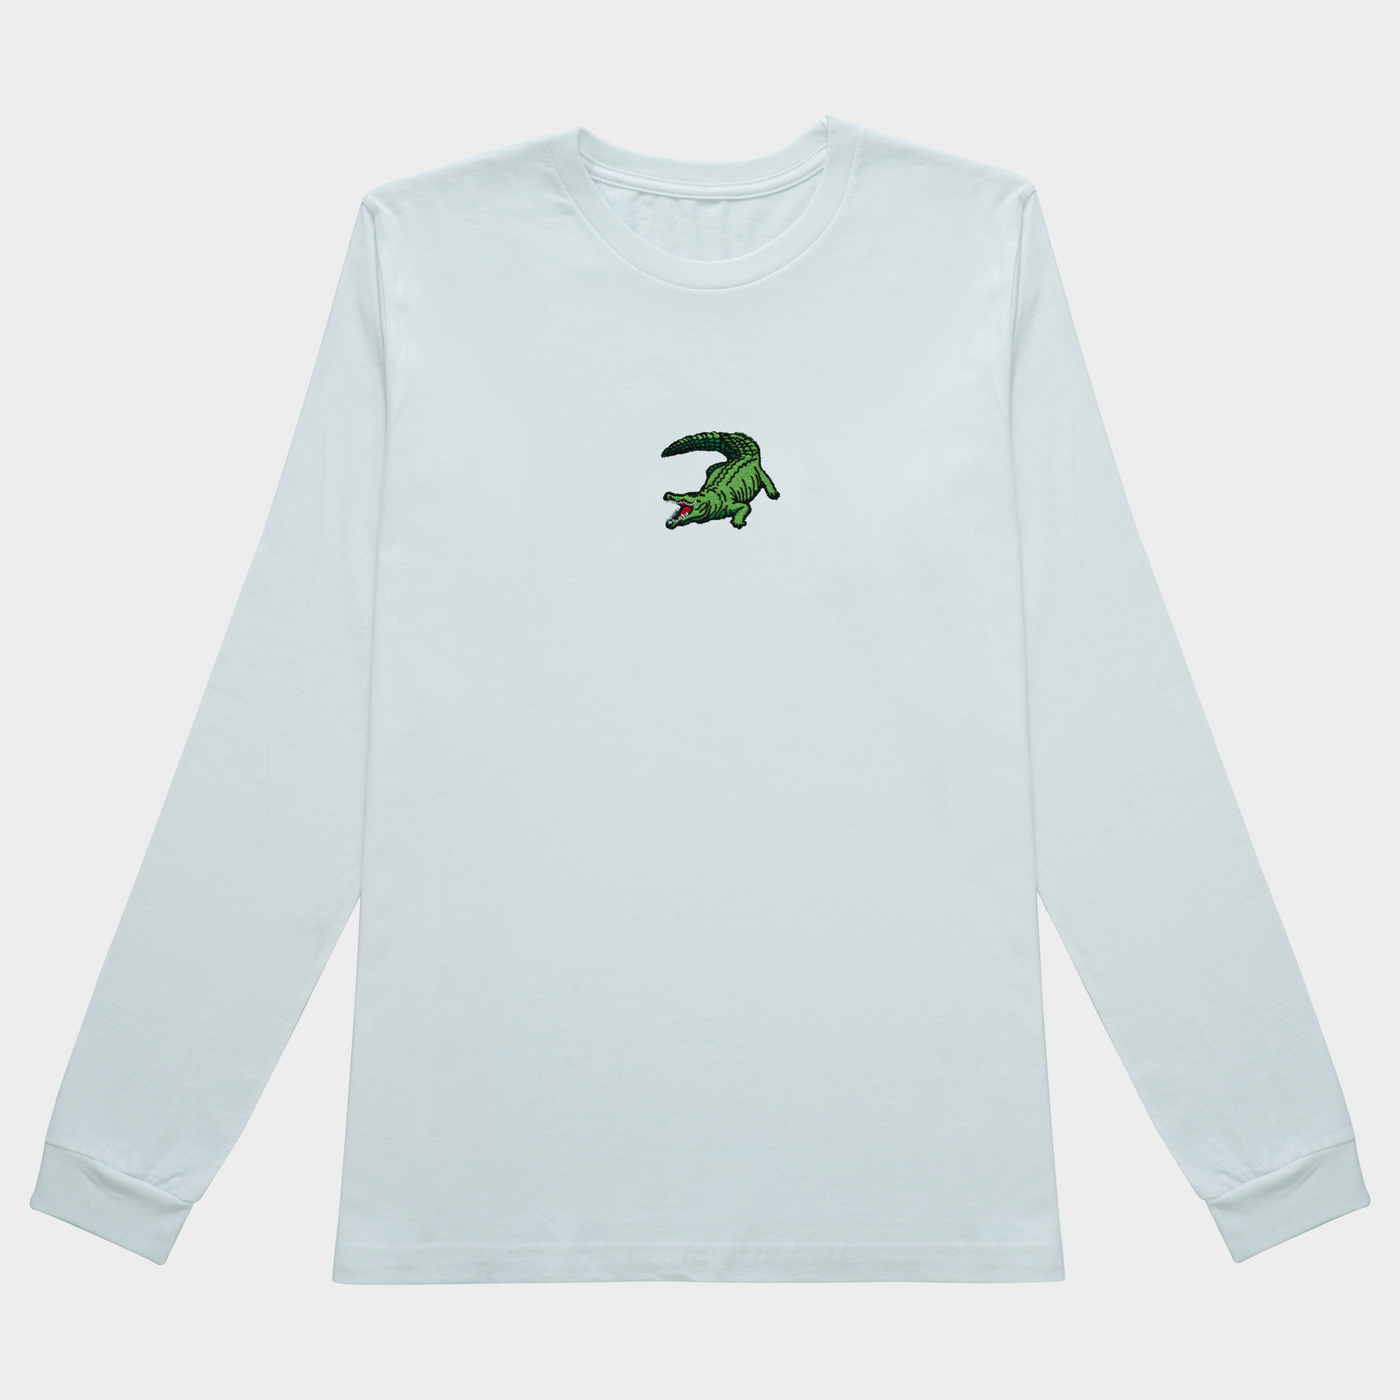 Bobby's Planet Women's Embroidered Saltwater Crocodile Long Sleeve Shirt from Australia Down Under Animals Collection in White Color#color_white